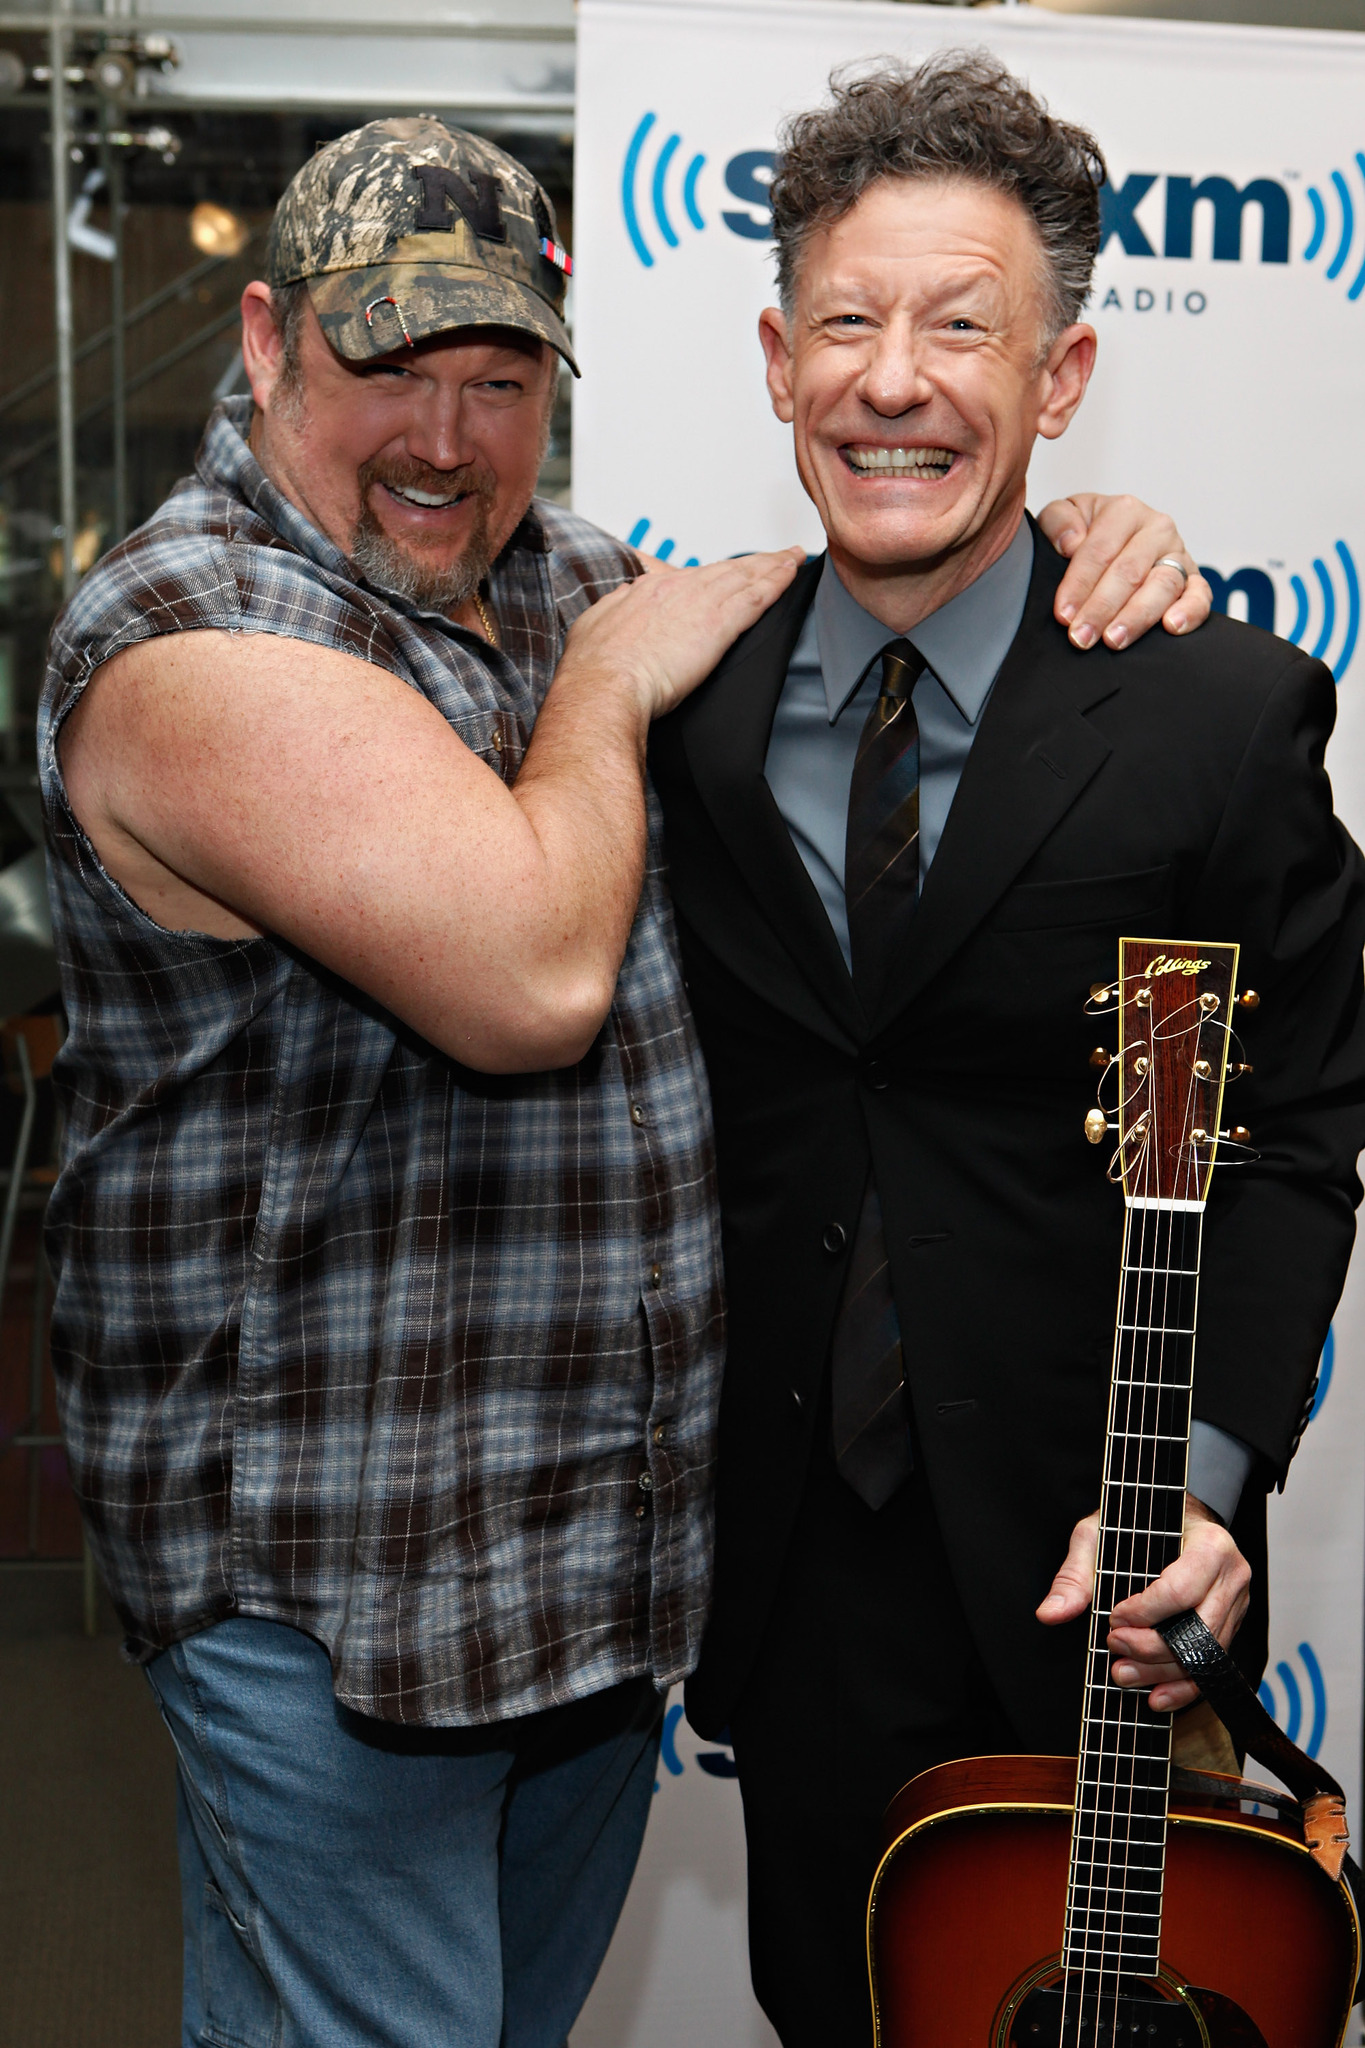 Lyle Lovett and Larry the Cable Guy